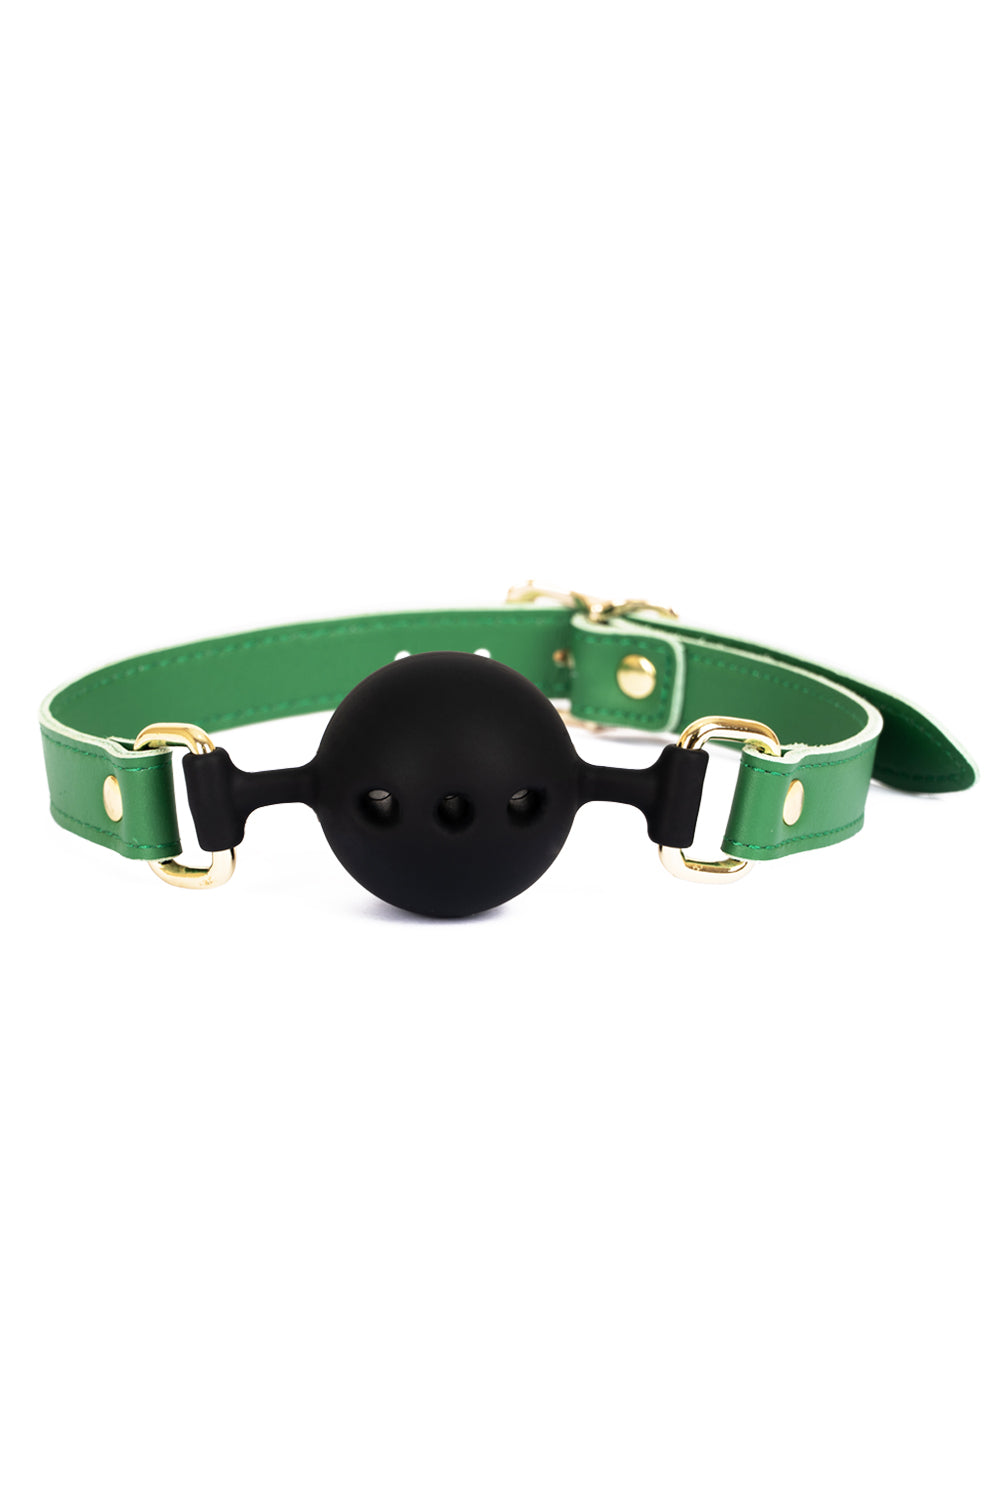 Soft Silicone Mouth Ball Gag. Green